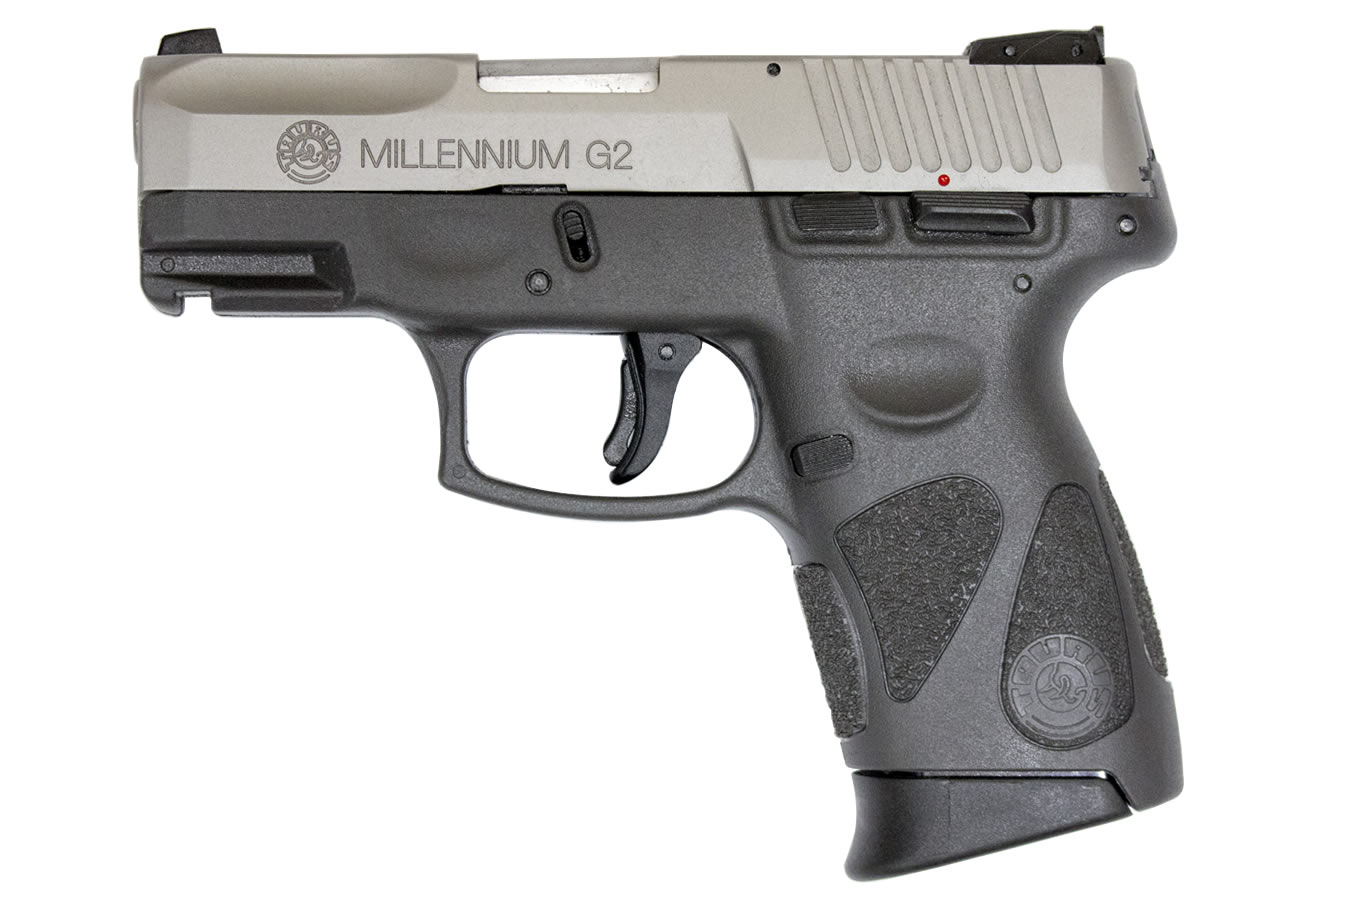 Taurus PT140 Millennium G2 40 S&W Pistol with Stainless Slide and Gray